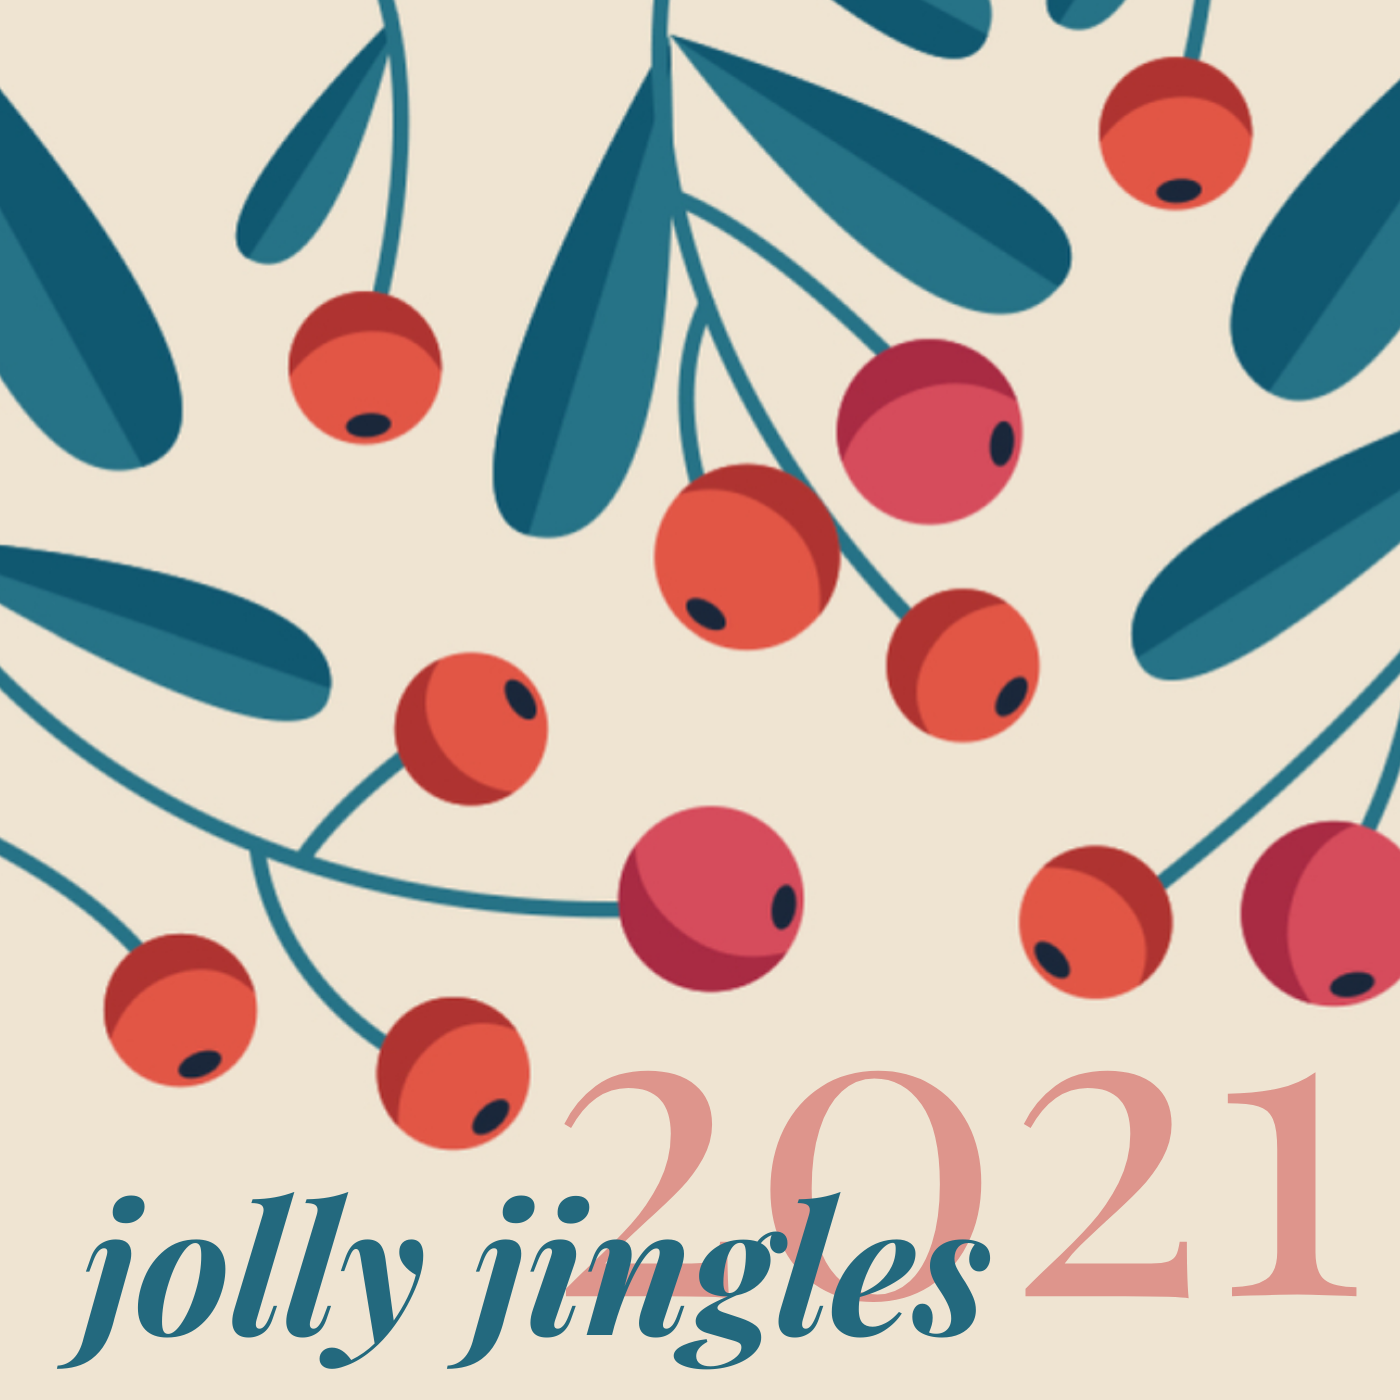 a square image of leaves and berries on a cream background saying jolly jingles 2021 at the bottom